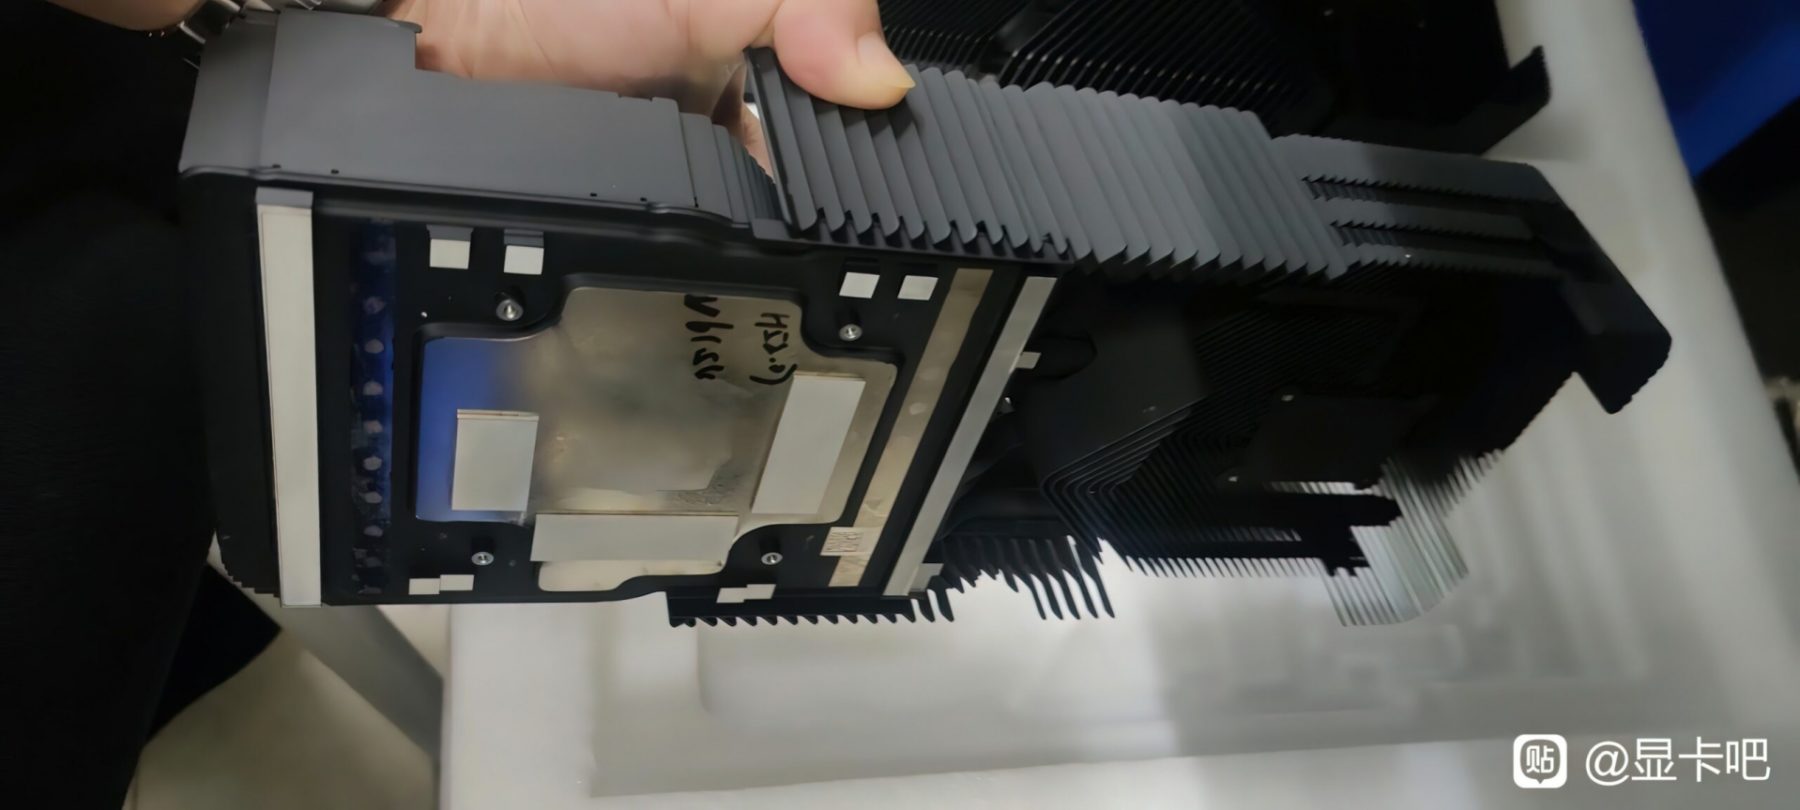 NVIDIA RTX 40-Series Founder Edition Cooler Photos Surface Online - returnal